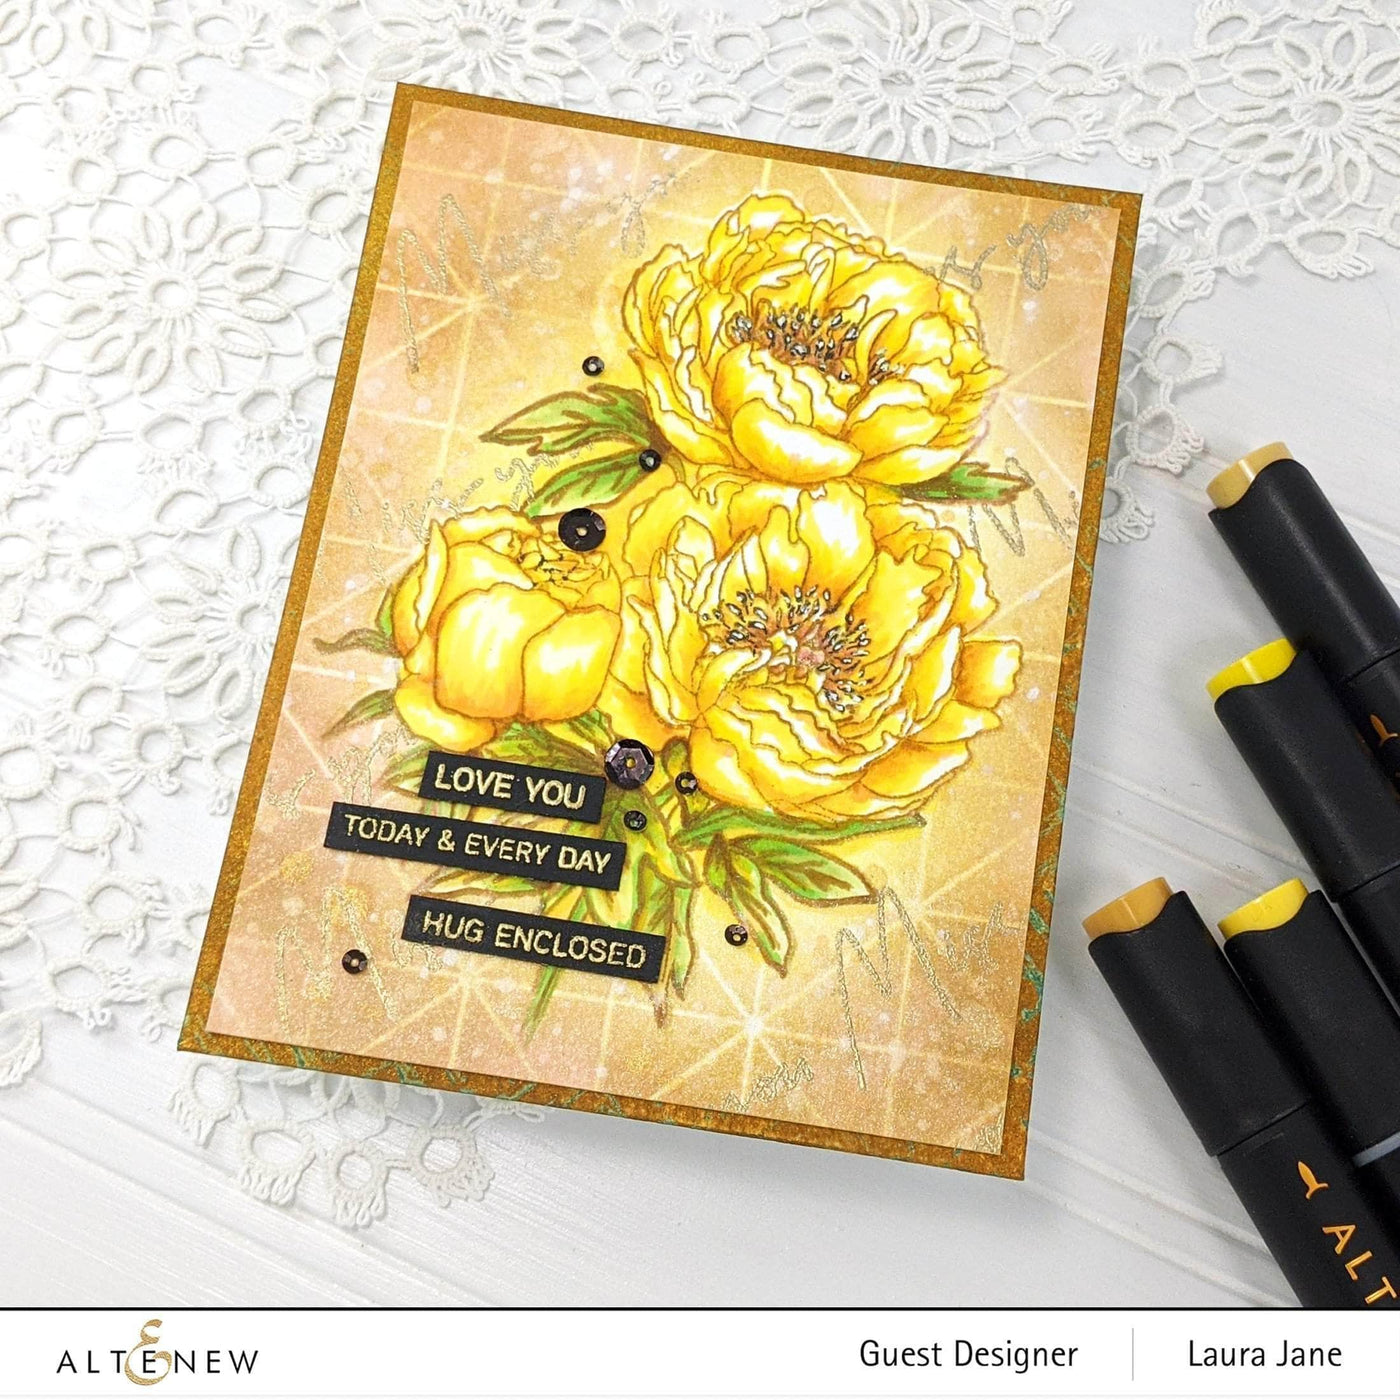 Clear Stamps Paint-A-Flower: Coral Sunset Outline Stamp Set